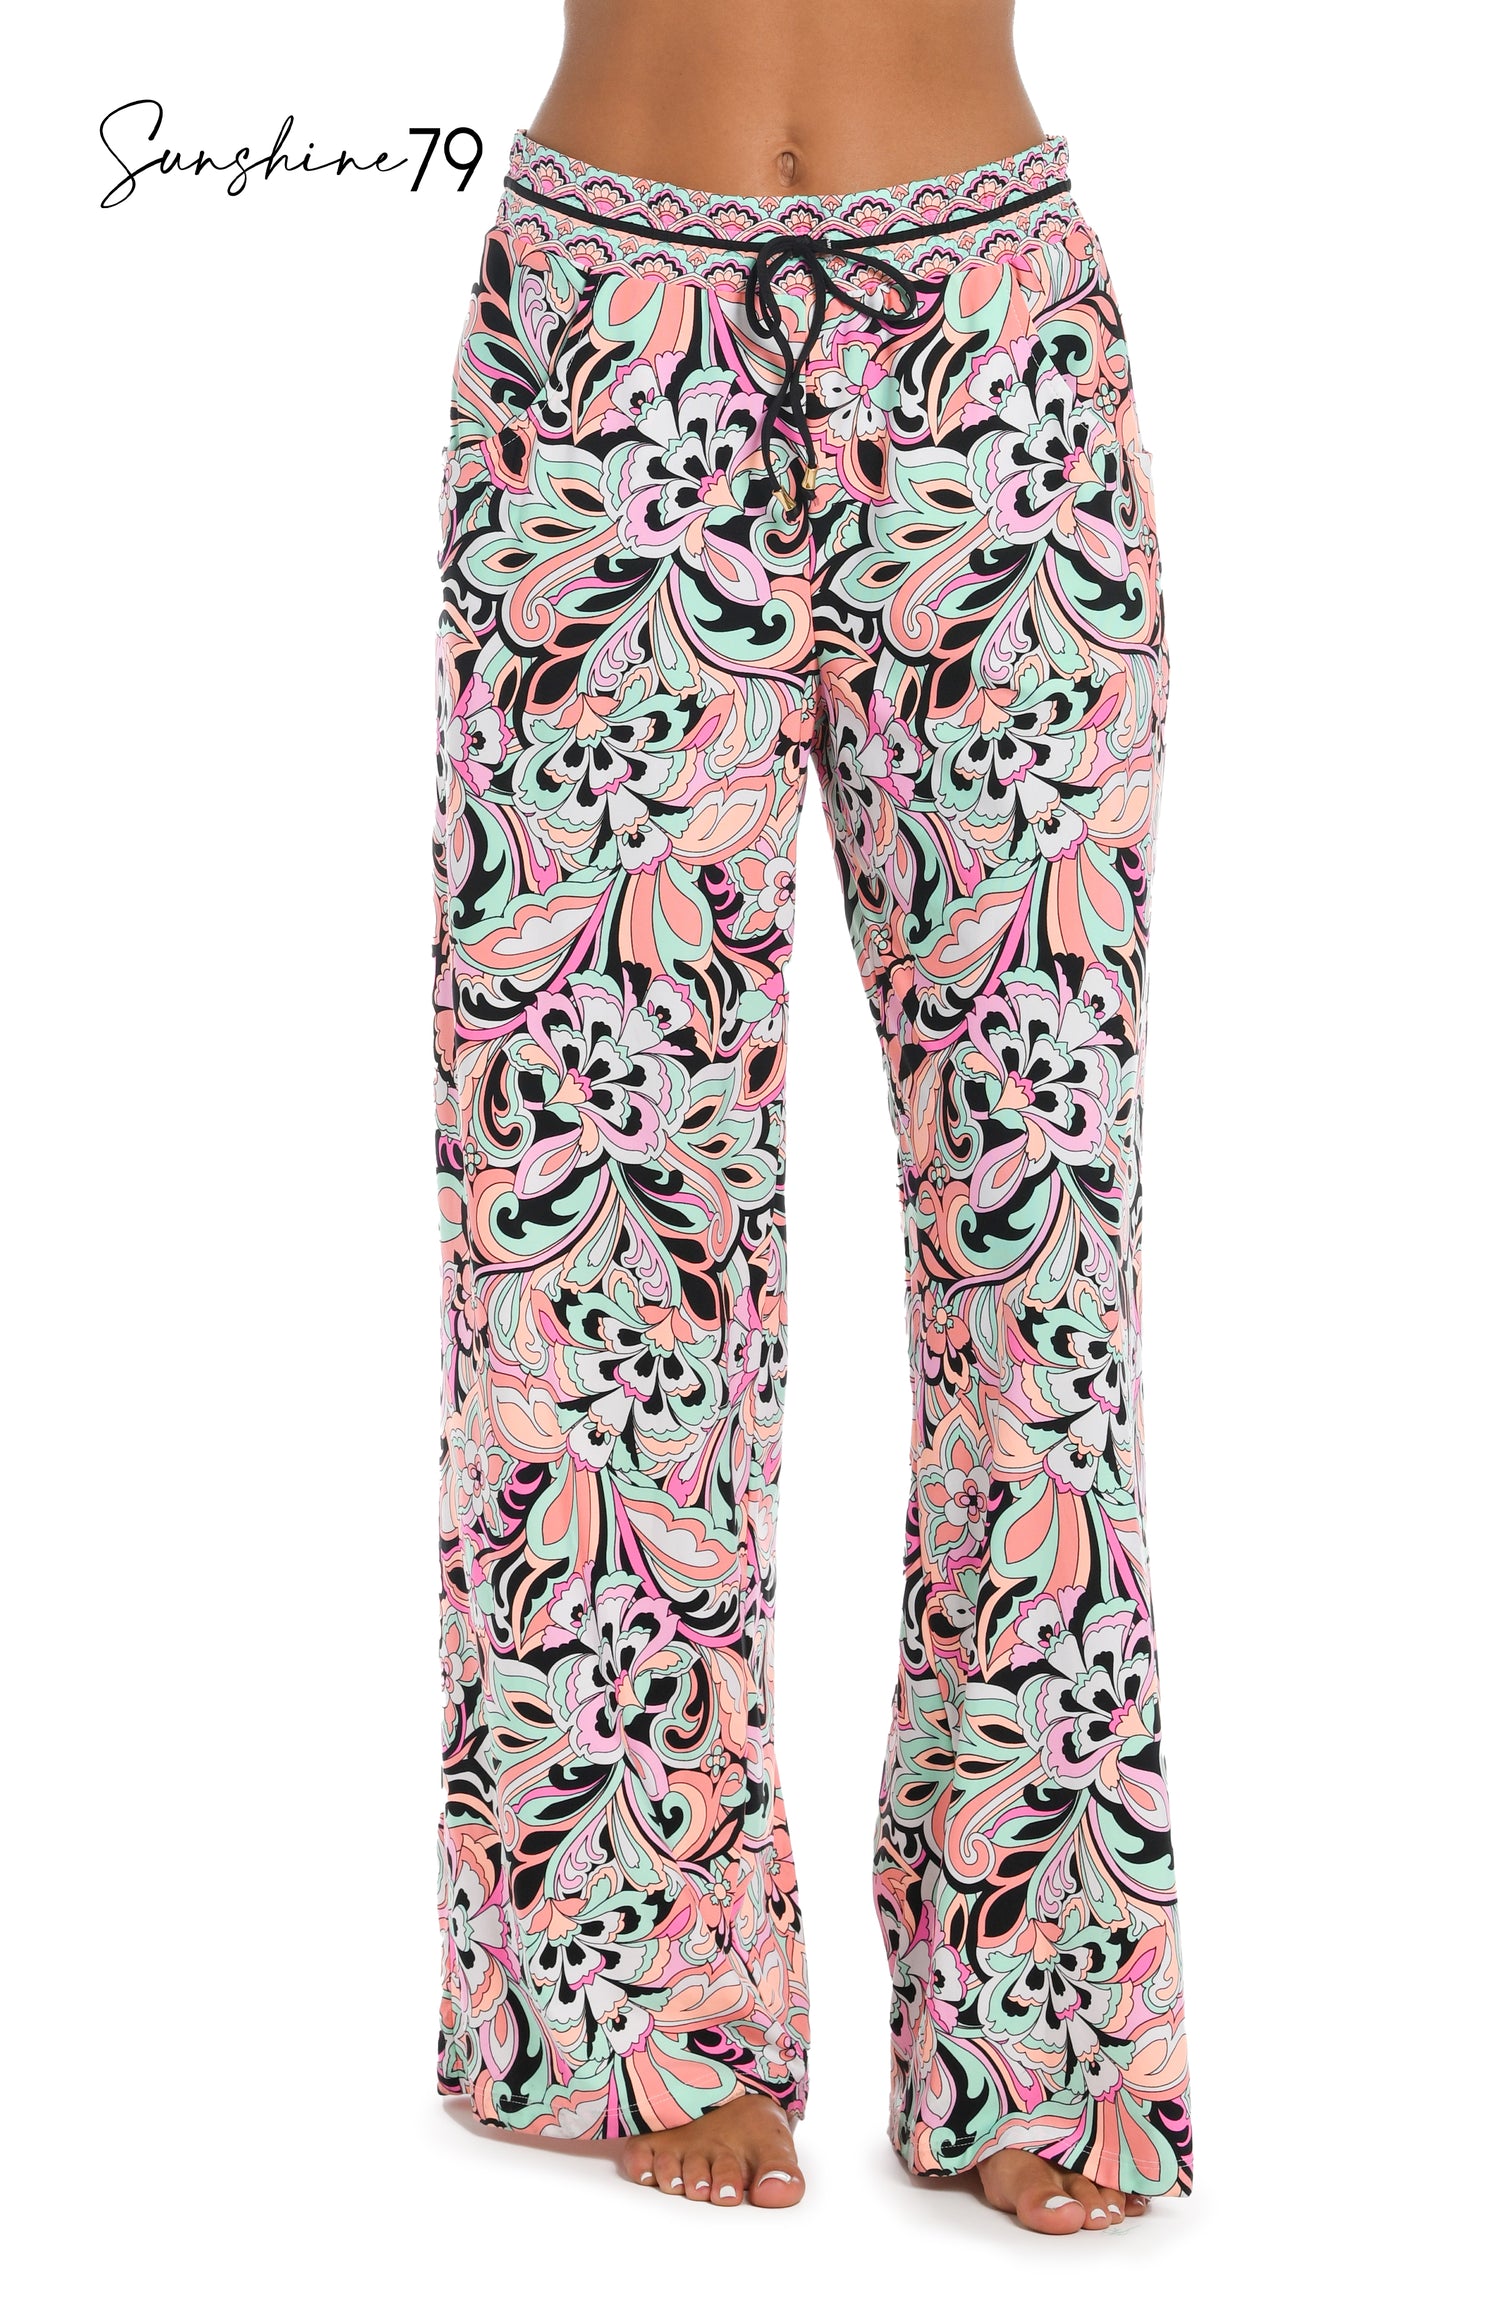 Sunshine 79 Paisley Party Beach Pant Cover Up